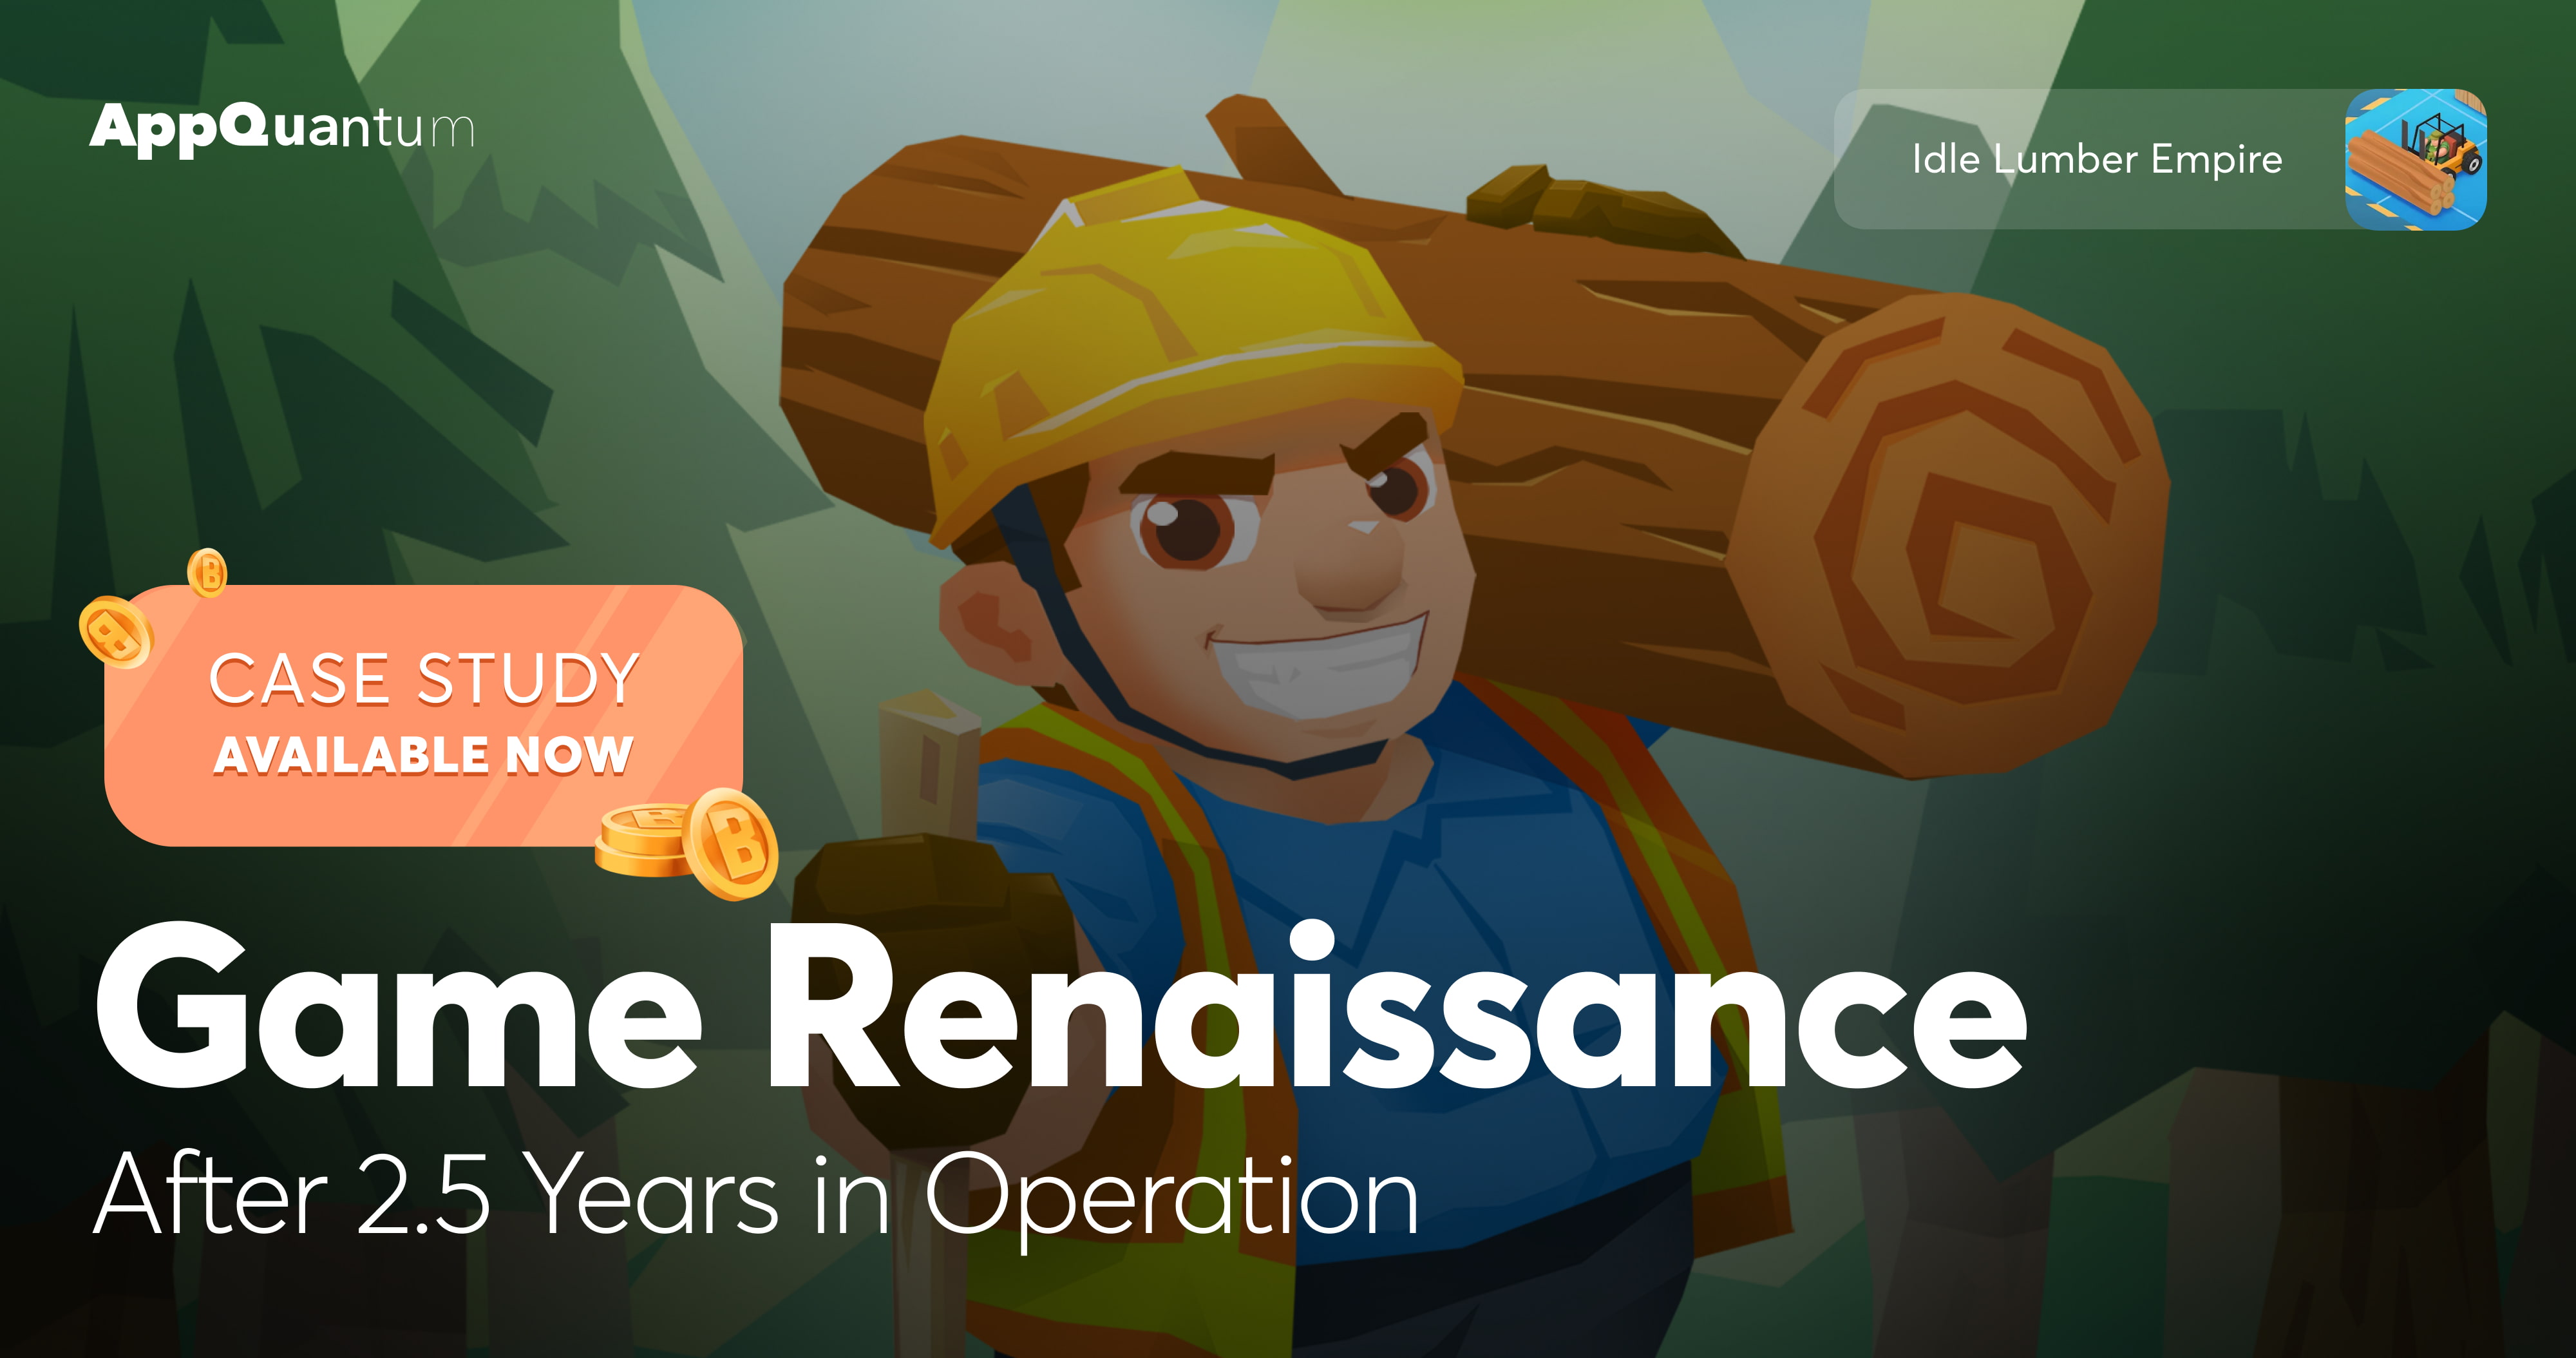 Idle Lumber Empire Case: Game Renaissance After 2.5 Years in Operation